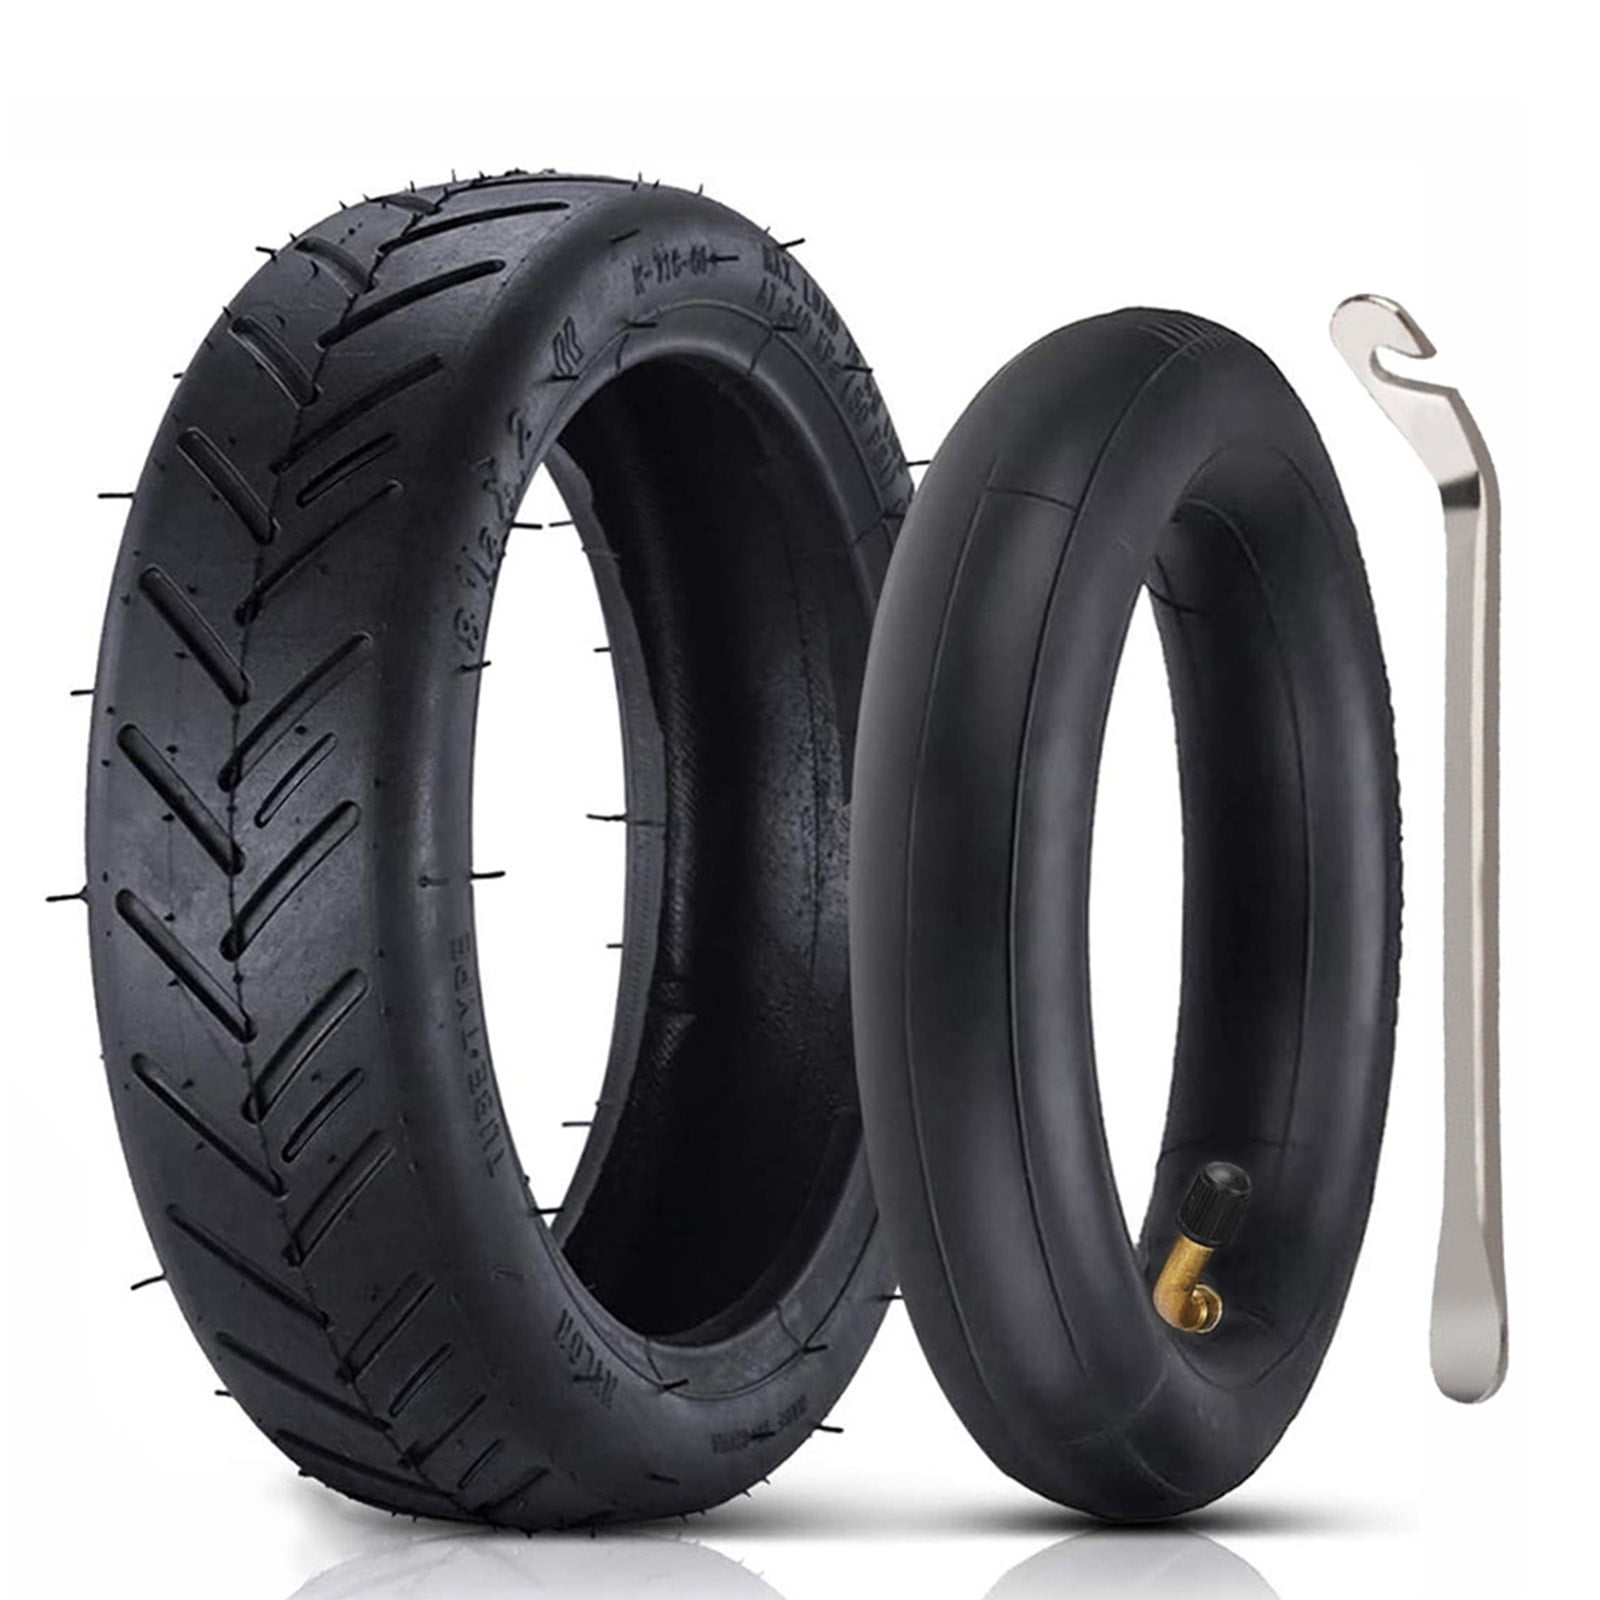  GLDYTIMES 8.5 Inch 8.5x2.0 50/75-6.1 Tire Solid Tire Fit for  Gotrax Gxl V2/ XR/Apex Xl Hiboy S2 Pro/Hiboy S2 MAX Xiaomi M365/Pro AOVOPRO  ES80 Electric Scooter 8 1/2 Tyre Anti-explosion Wheel 